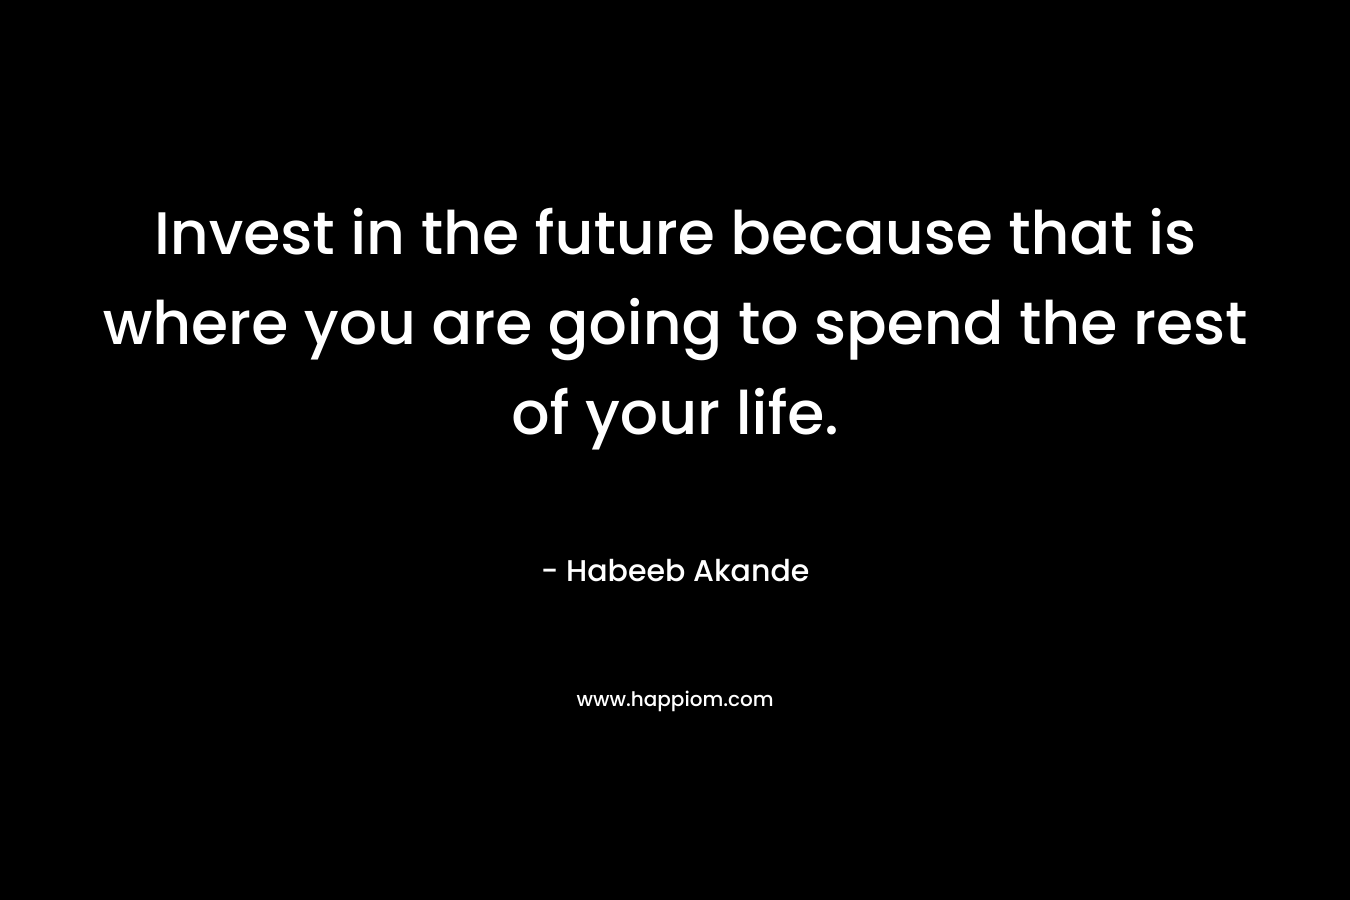 Invest in the future because that is where you are going to spend the rest of your life. – Habeeb Akande